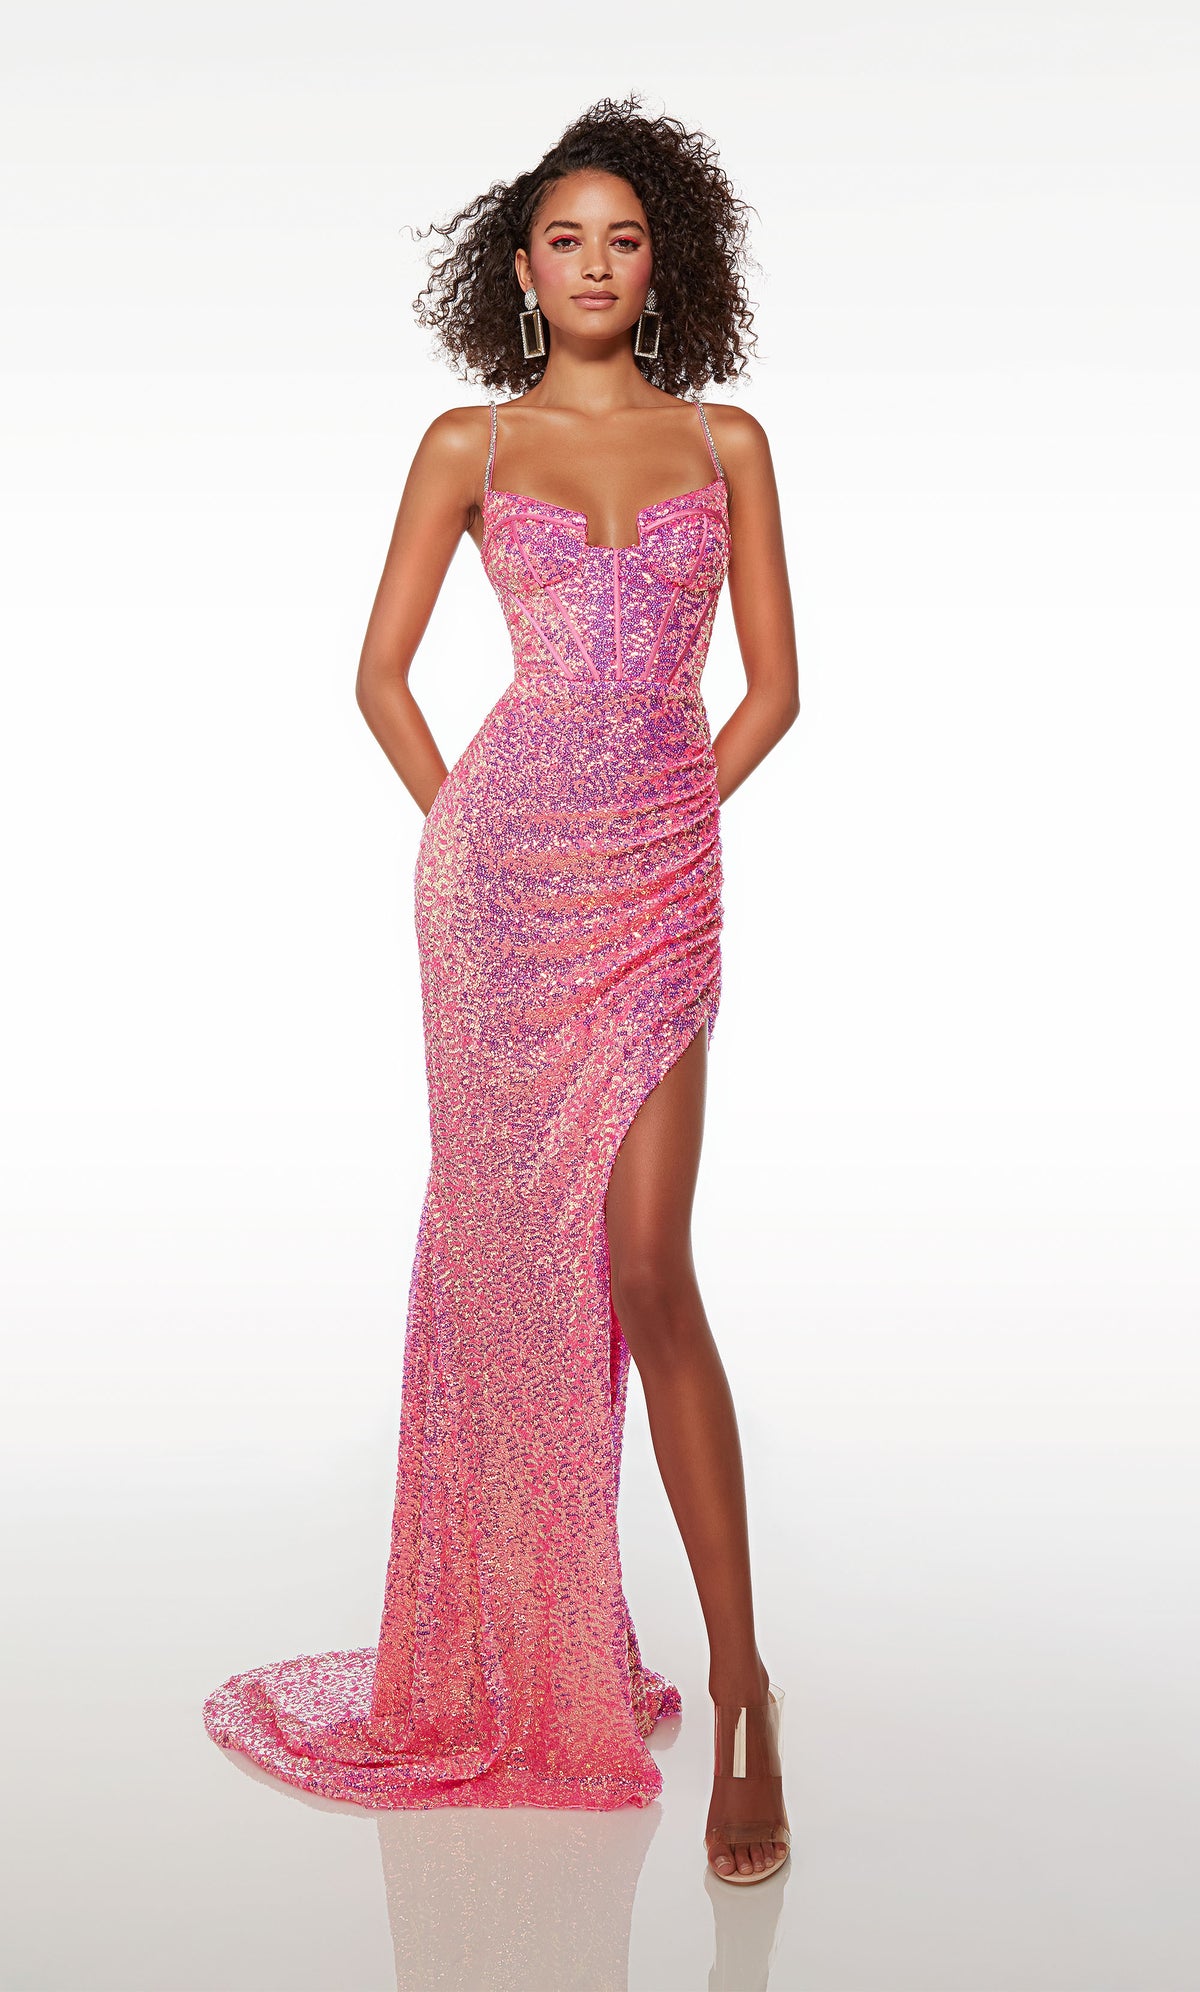 Chic pink sequin dress: sweetheart neckline, corset bodice, jewel-embellished straps, side slit, and an stylish train for an glamorous flair.